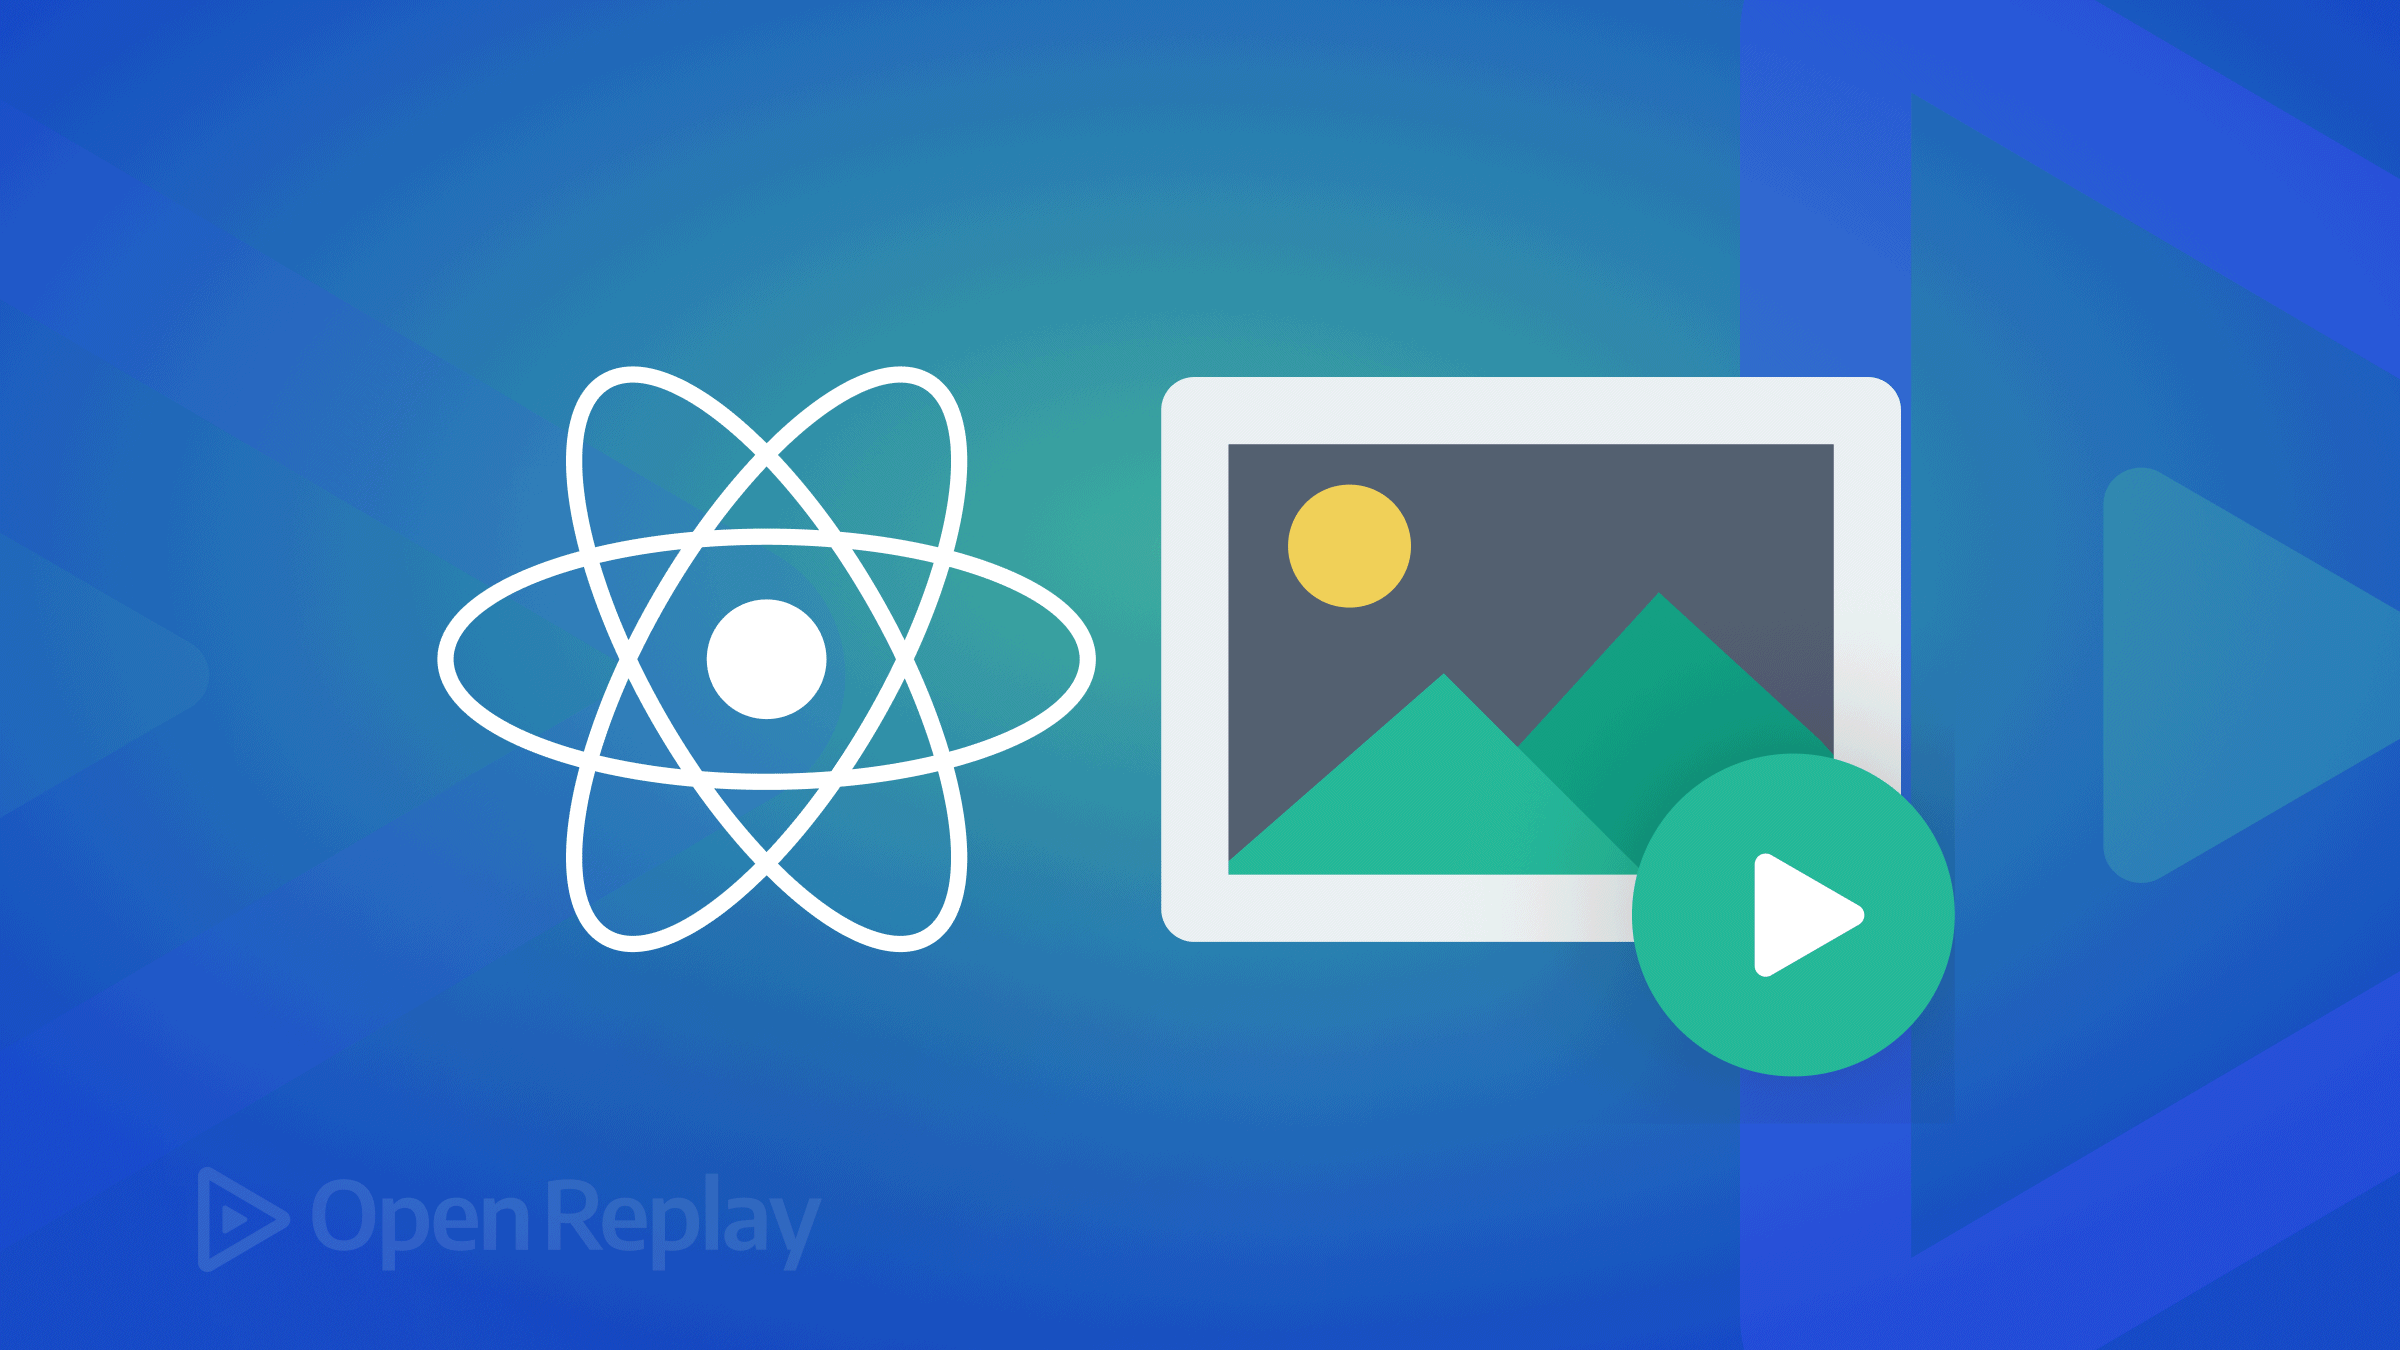 Capture real-time images and videos with React-Webcam